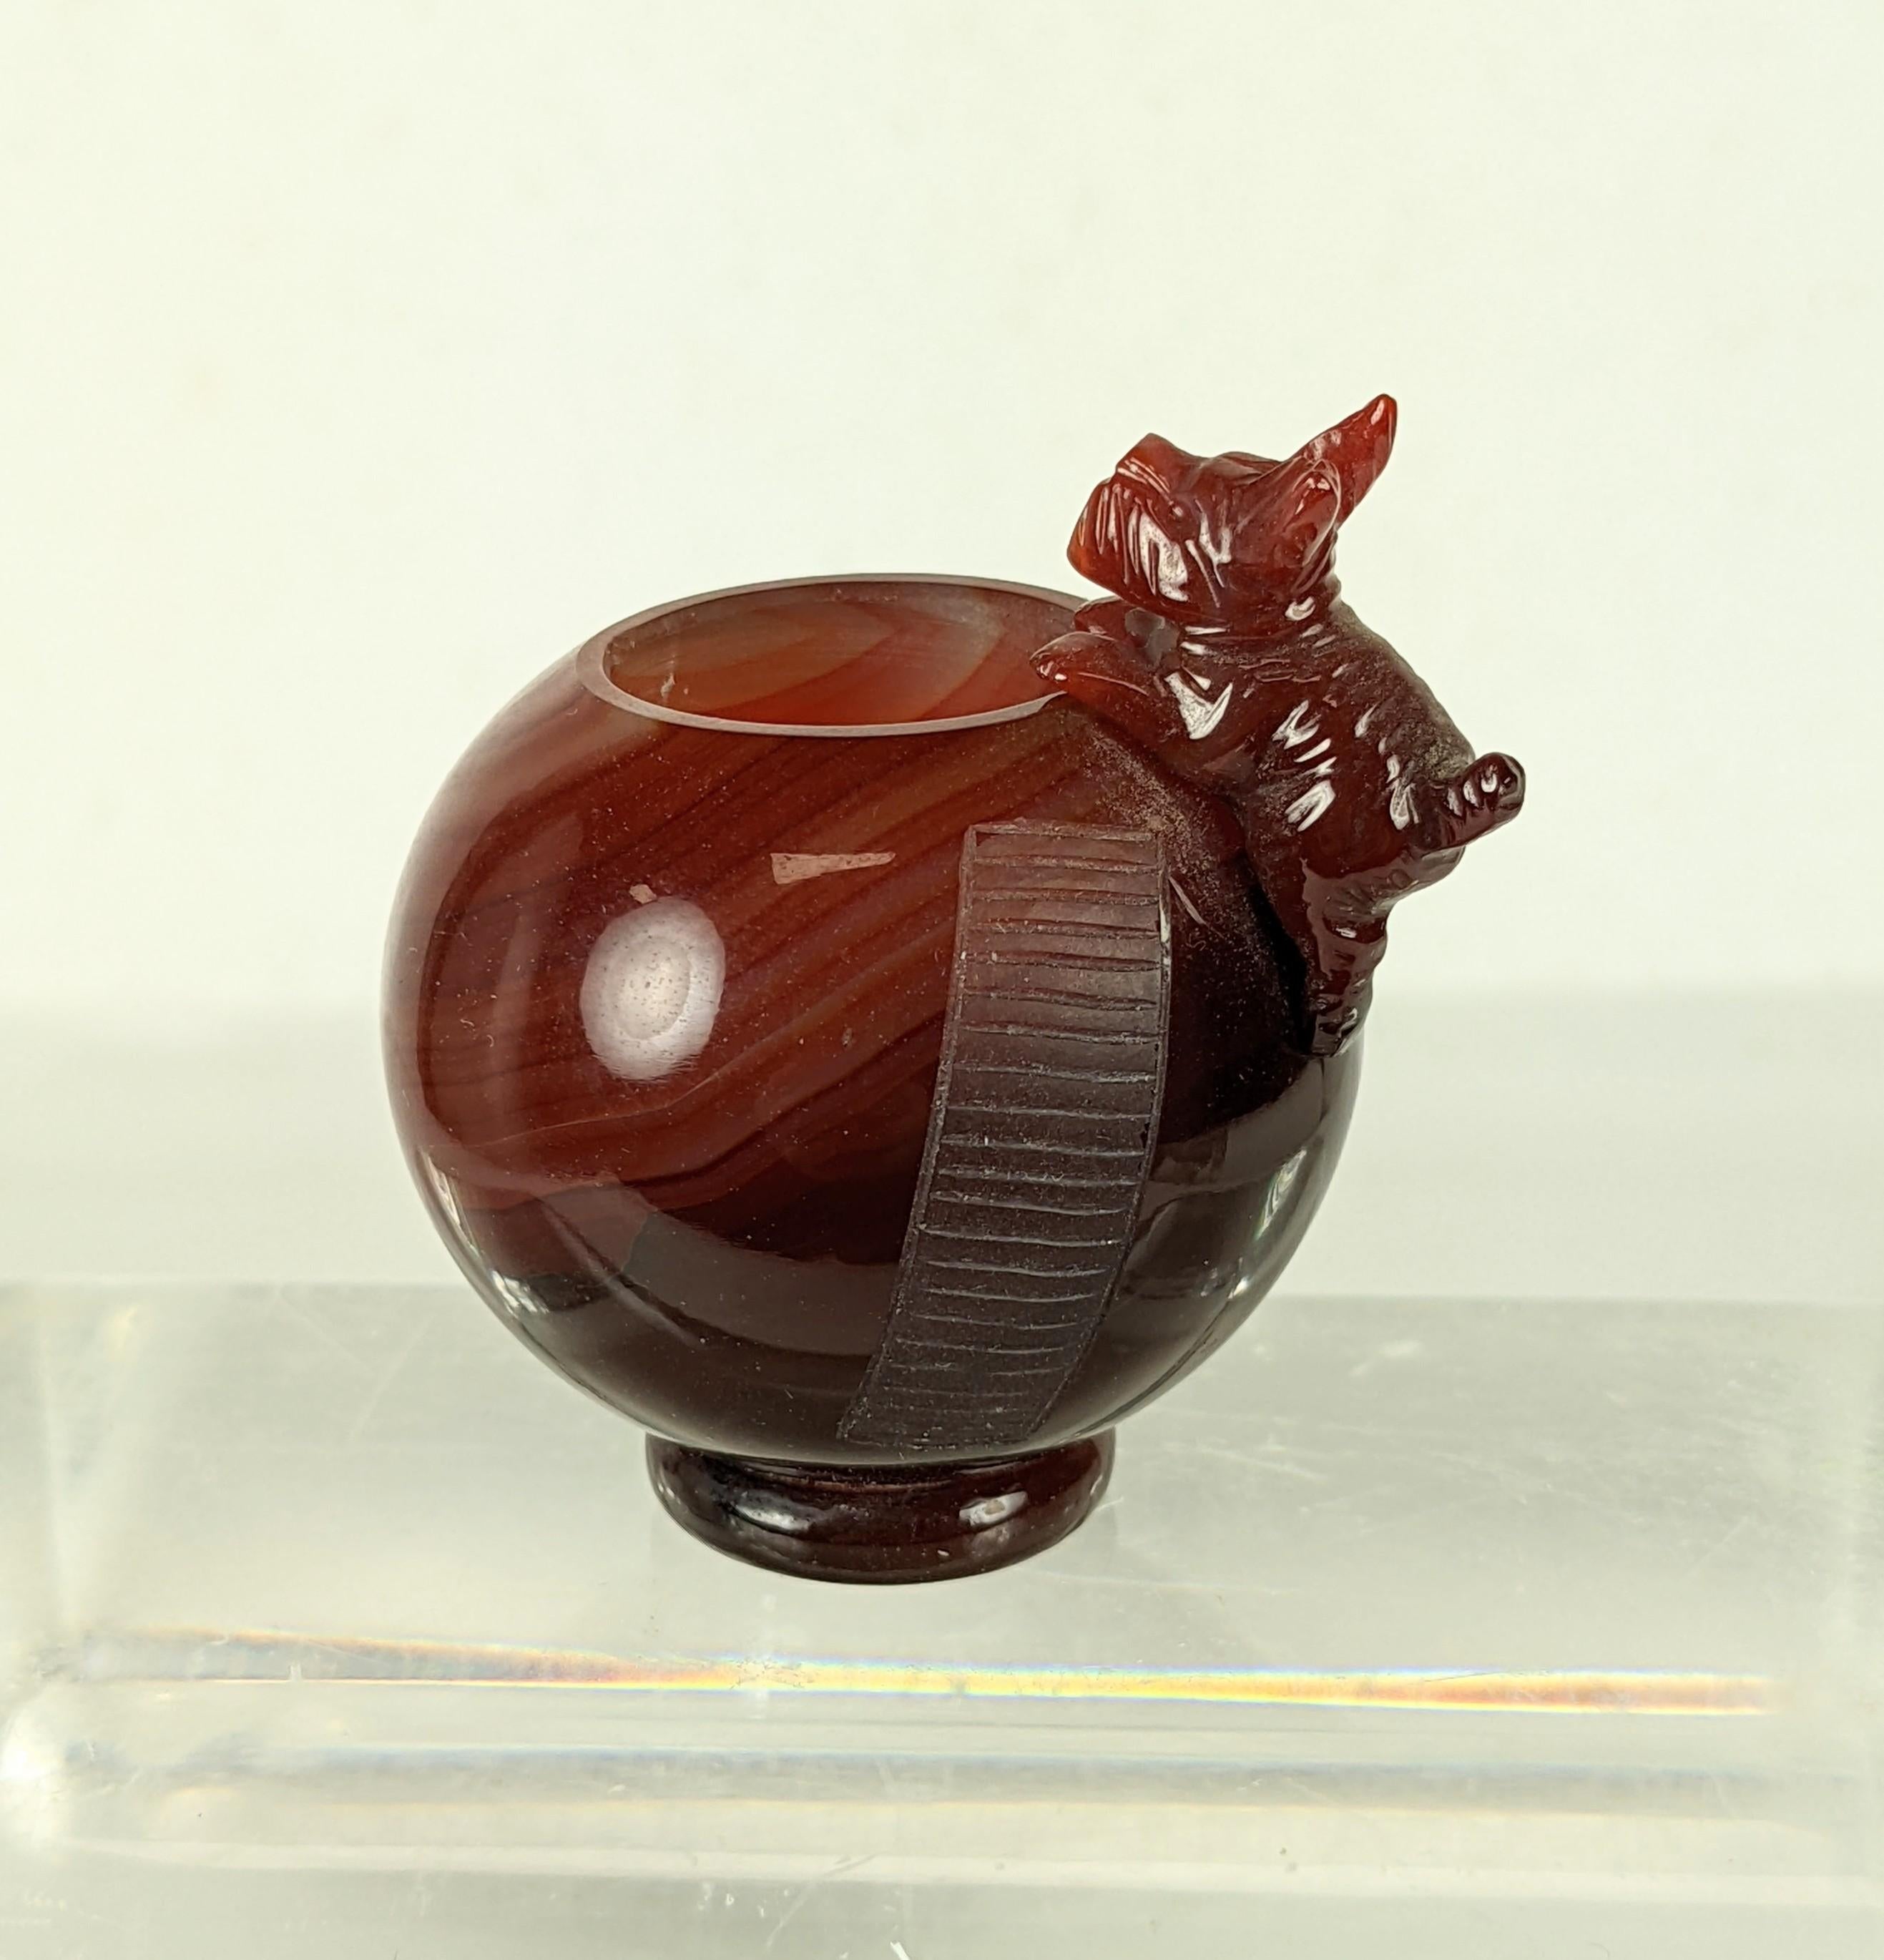 Charming hand carved Art Deco Carnelian Match Holder with a terrier climbing up a sphere. A faux ladder is carved into the stone and becomes the 